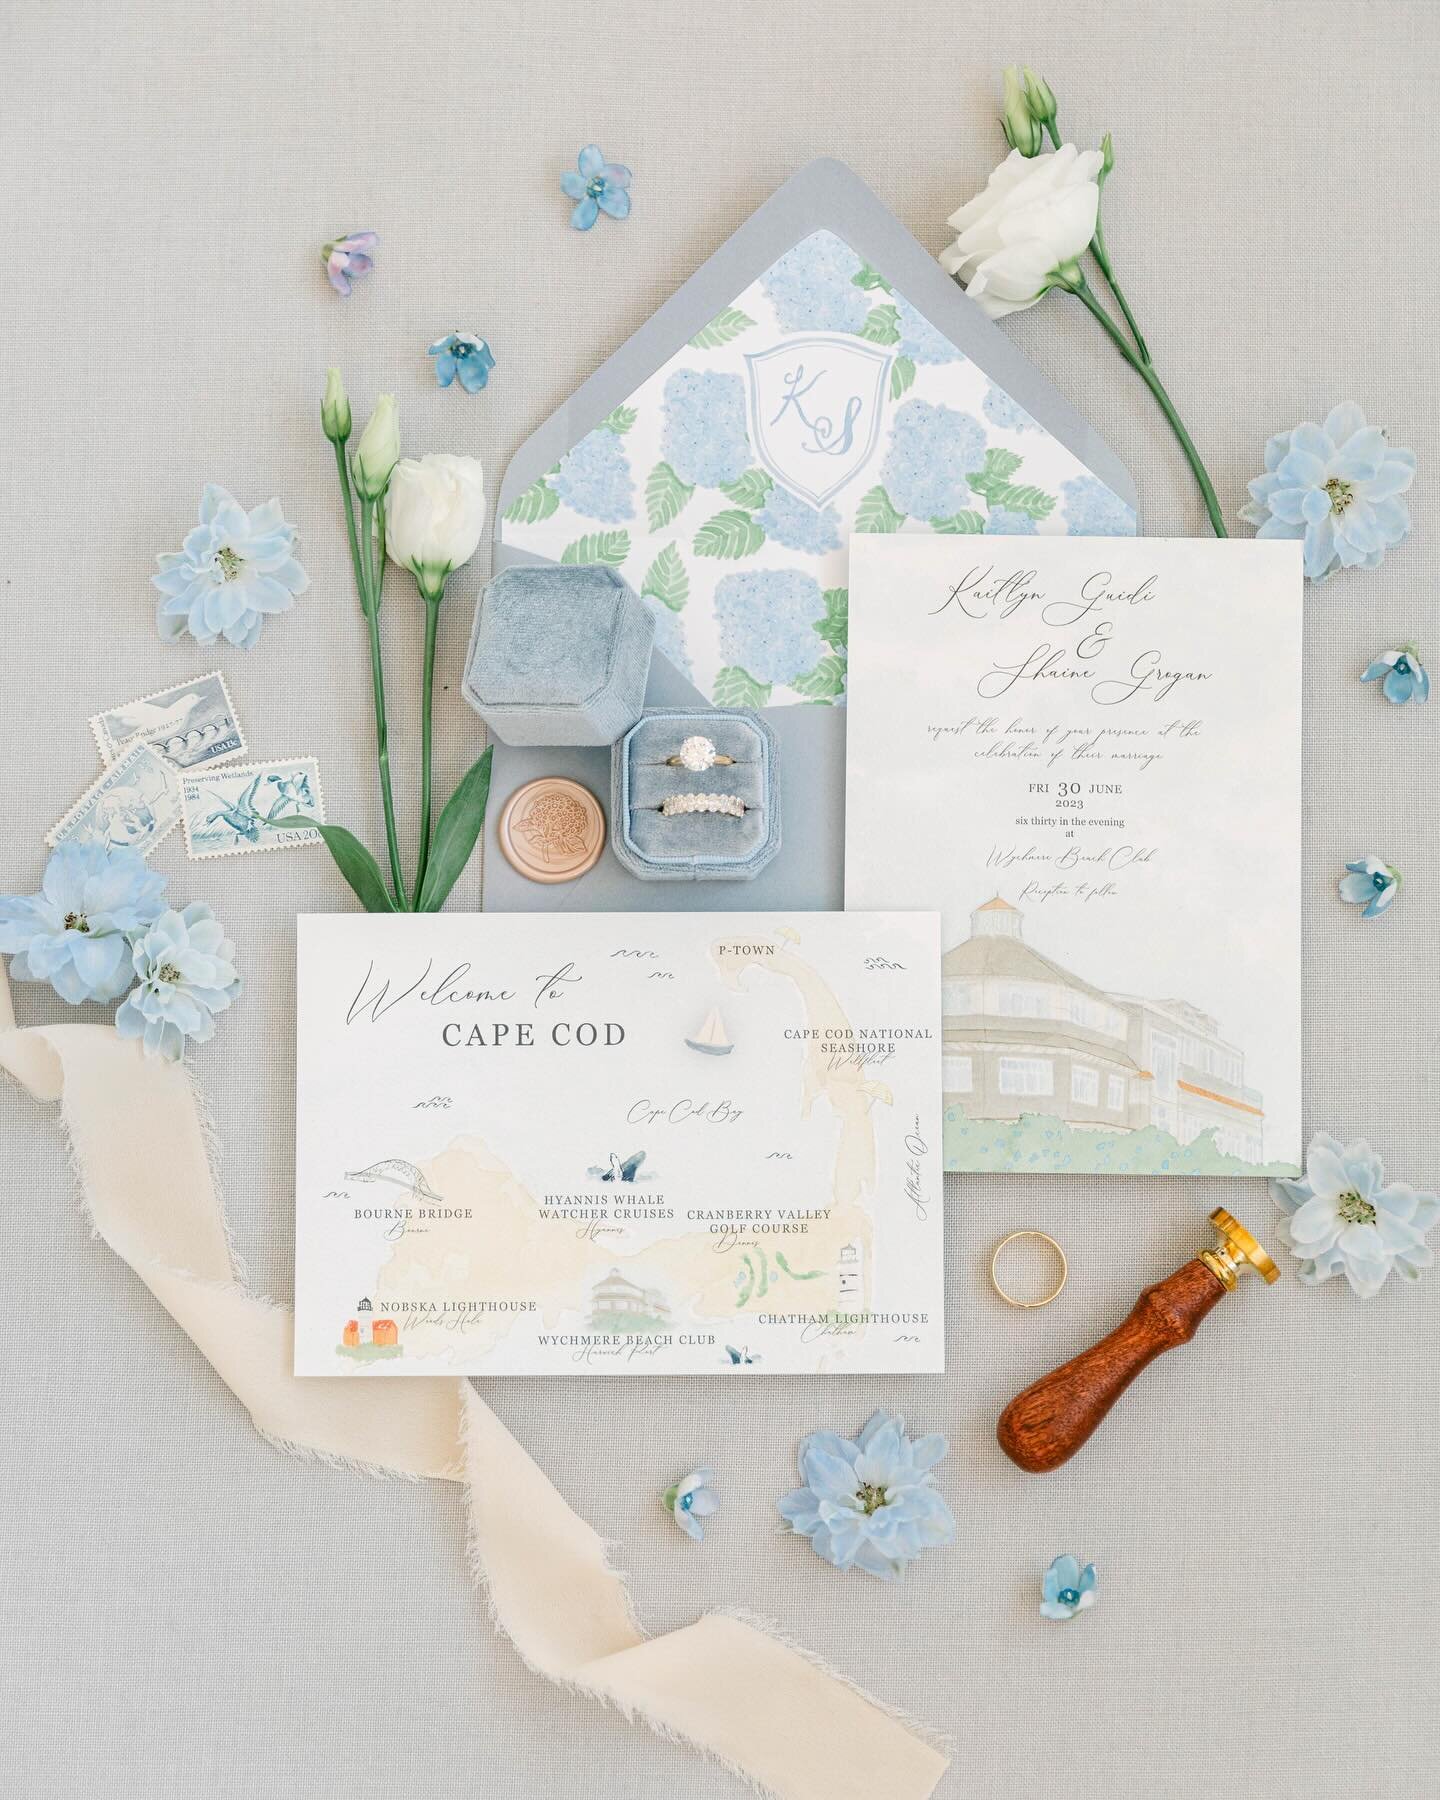 Soo early spring means we&rsquo;re that much closer to summer weddings on Cape Cod&hellip;right? 🌞 🌊 
📸: @carlymphotography 
&bull;
&bull;
&bull;
&bull;
#groundhogday #watercolor #gouache #landscapewatercolor #princetonbrushes #weddinginvites #wat